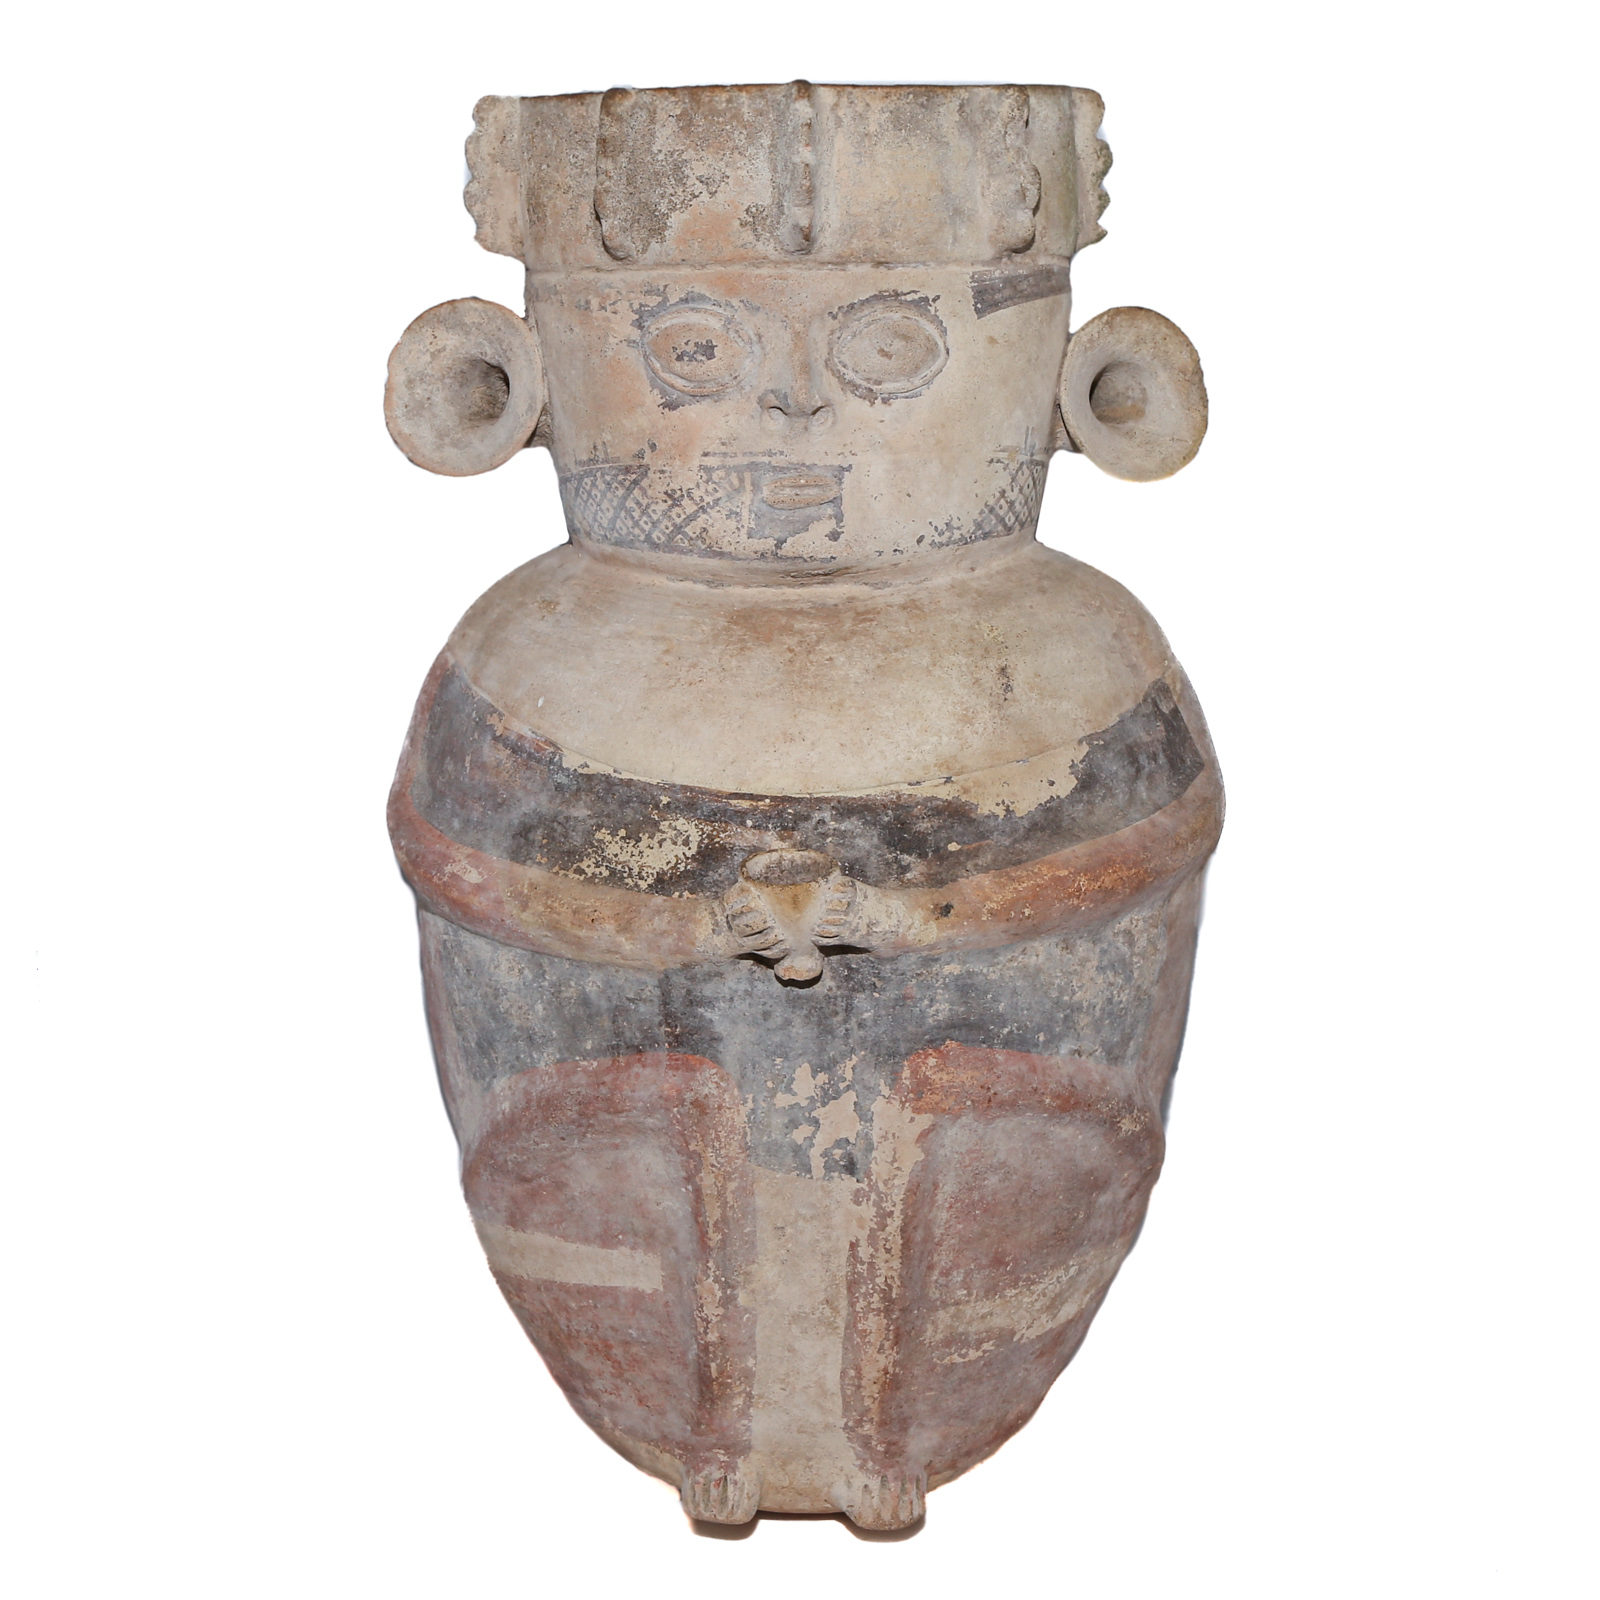 CHIMU PAINTED EARTHENWARE FIGURAL